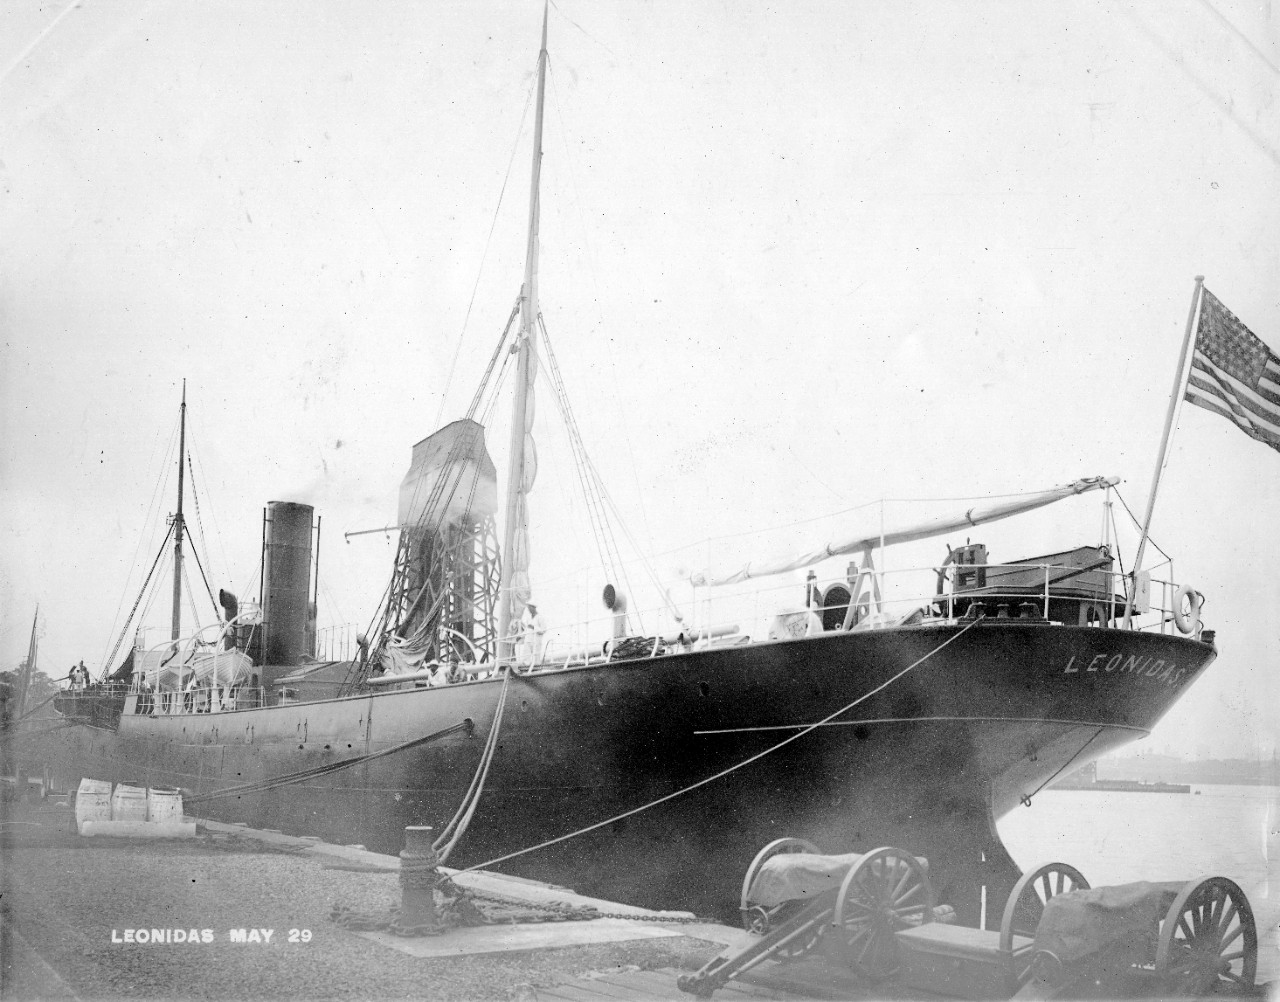 Leonidas fitting out at the New York Navy Yard, Brooklyn, N.Y., 29 May 1898. (U.S. Navy Photograph, RG 181-NYS, Box 3, National Archives and Records Administration, Still Pictures Division, College Park, Md.)